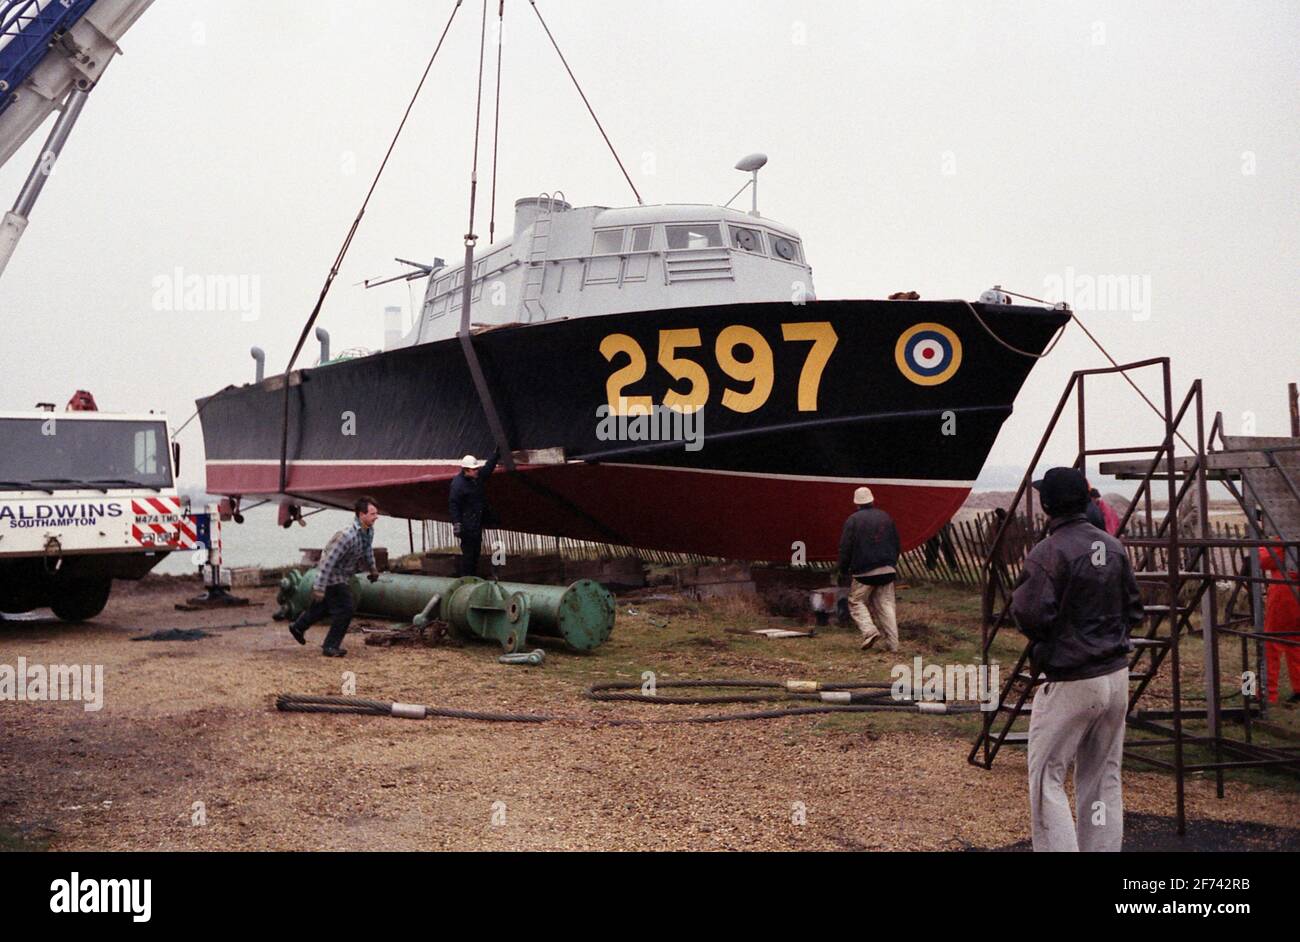 AJAXNETPHOTO. 7TH FEBRUARY, 1996. CALSHOT, ENGLAND. -ASR LIFT - AIR SEA RESCUE CRAFT 2597 BEING LIFTED INTO THE WATER AT CALSHOT SPIT AHEAD OF TOW TO THE HAMBLE RIVER AND A NEW MOORING.  PHOTO: JONATHAN EASTLAND/AJAX  REF:960702 28 Stock Photo